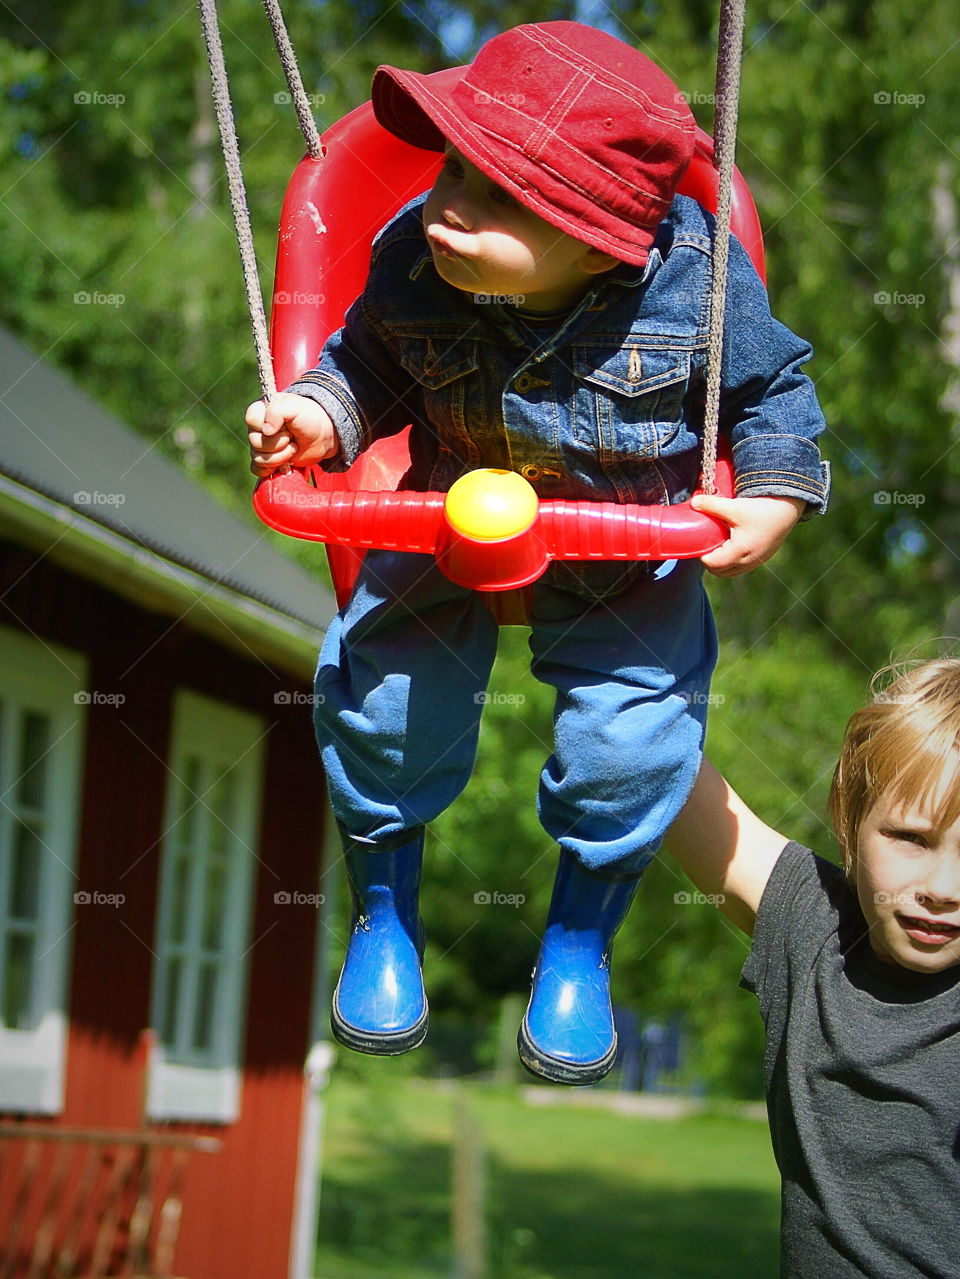 Toddler swinger and big sister helps pushing